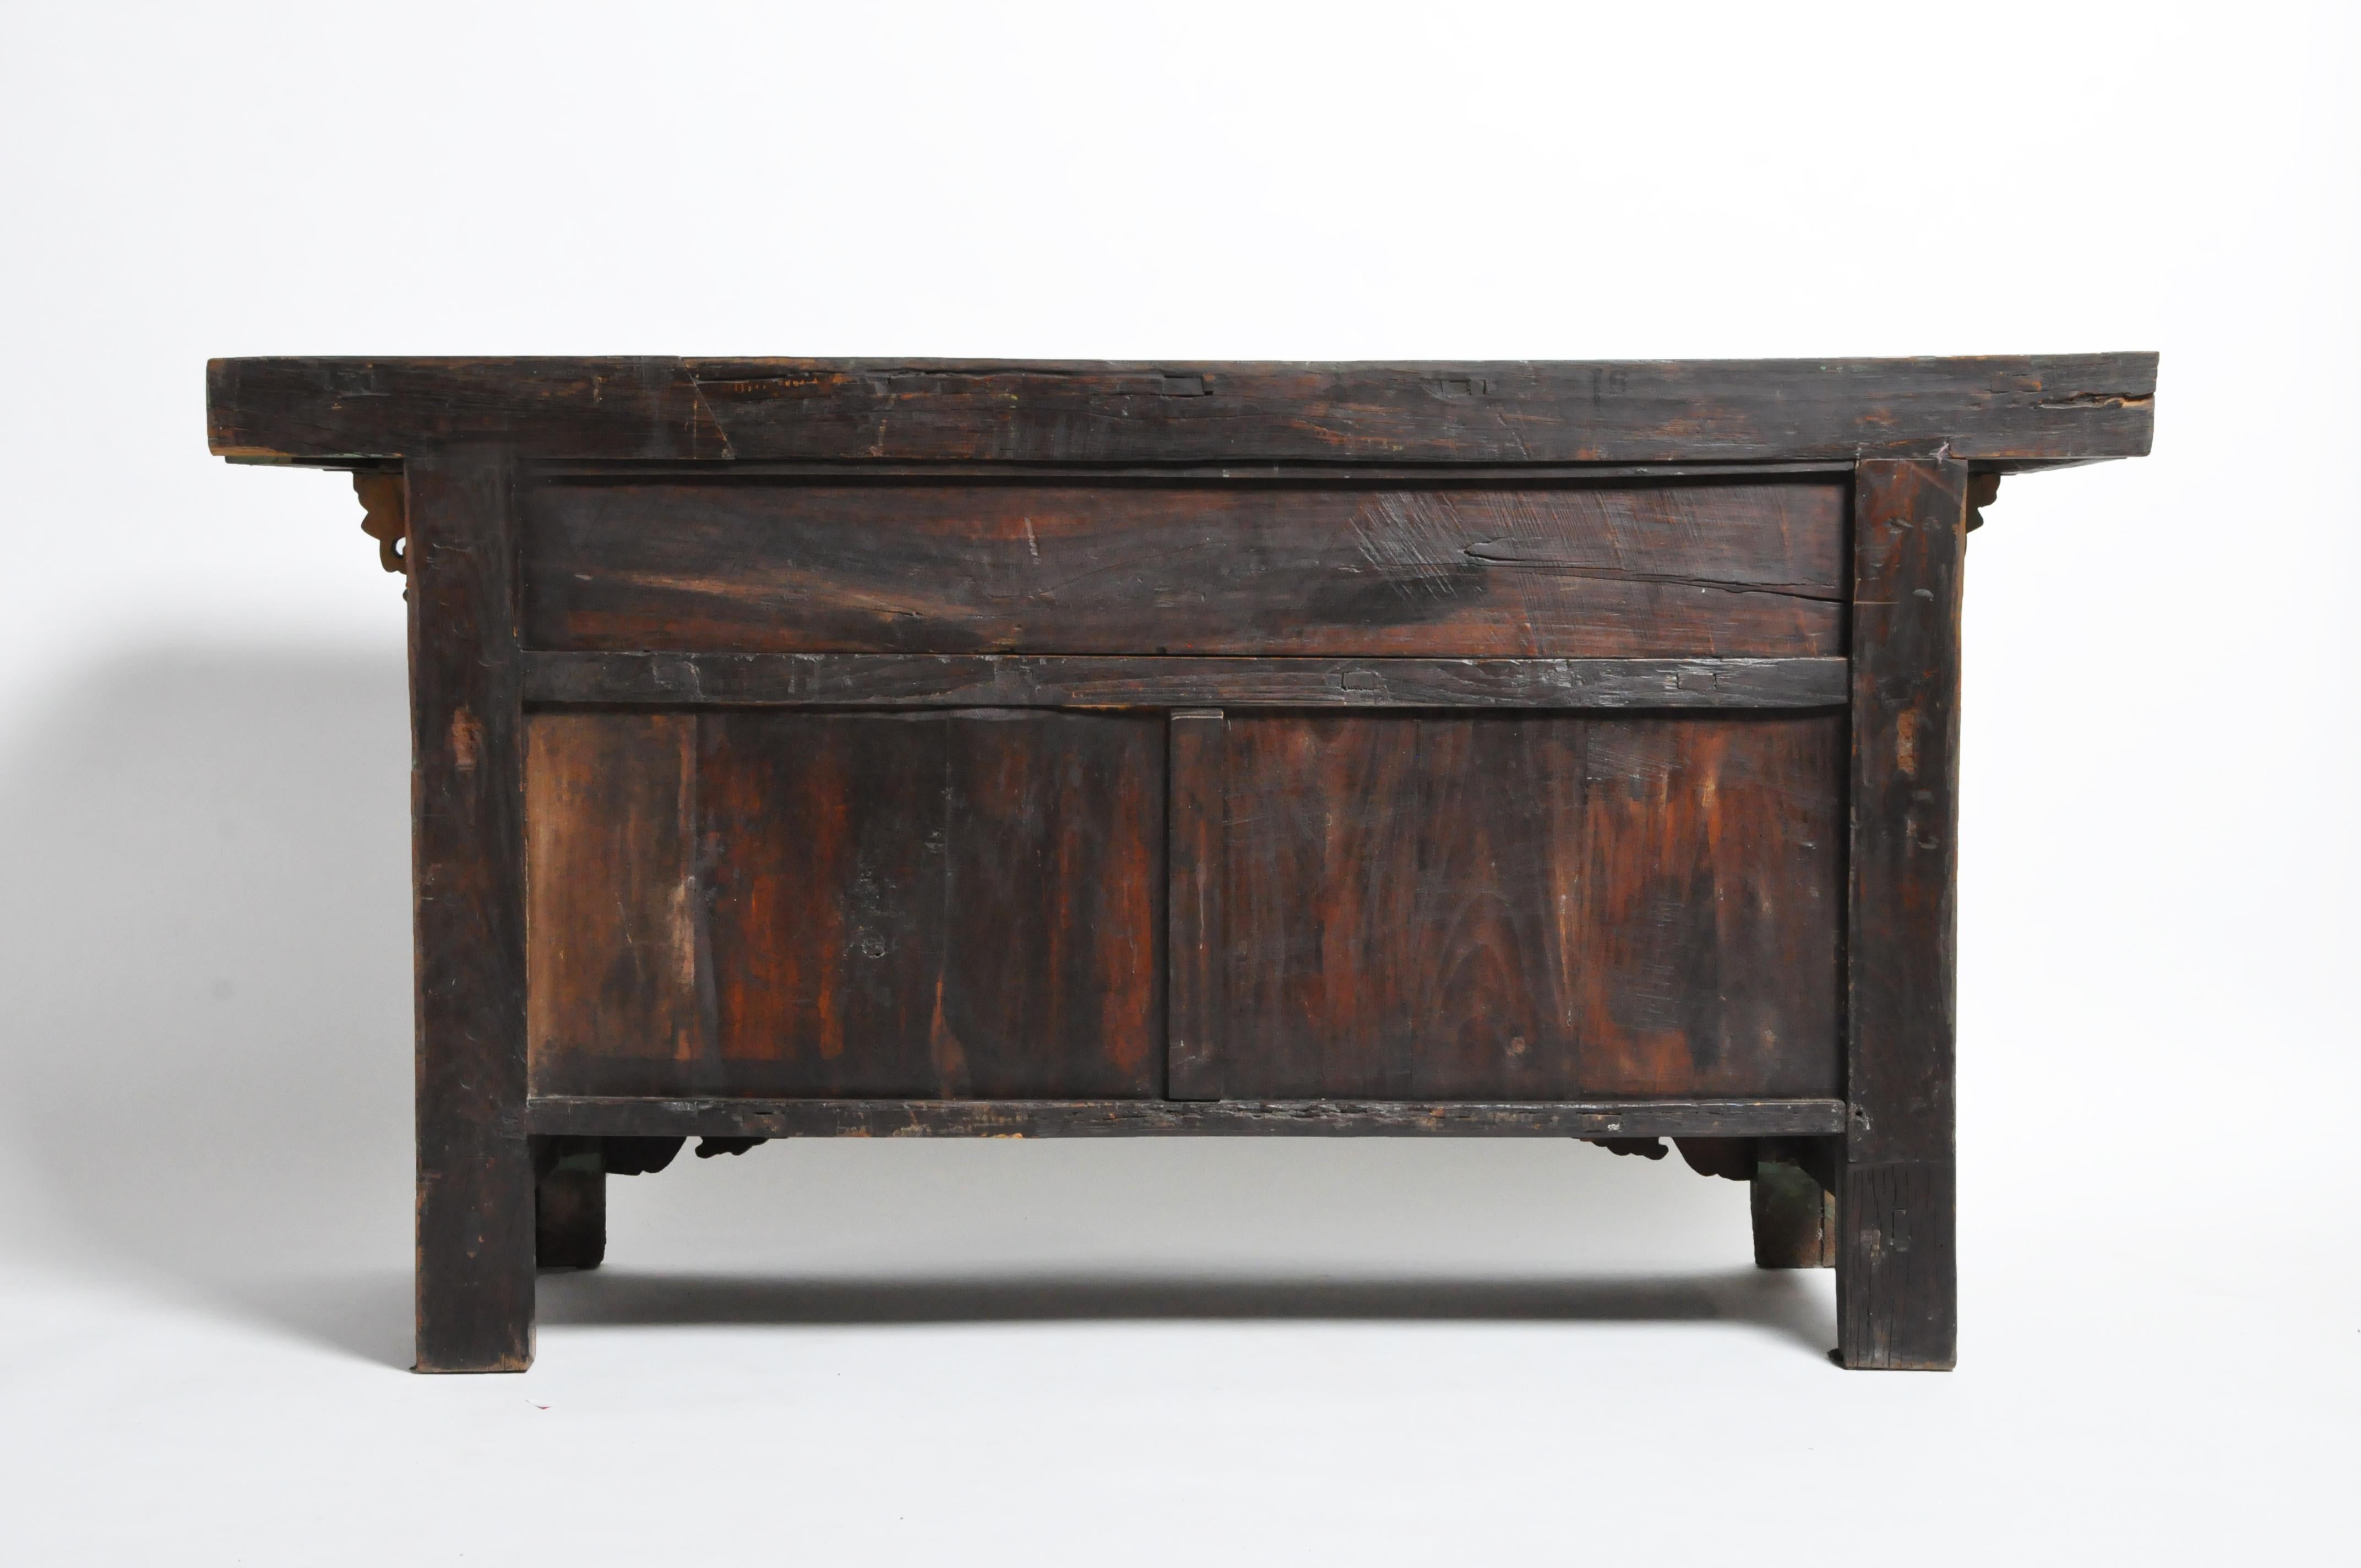 This gorgeous altar coffer is from China and was made from elmwood and lacquer, circa 1880. The piece features its beautifully aged original patina with 4 drawers and a pair of doors for storage. The coffer dates to the late-Qing Dynasty period.